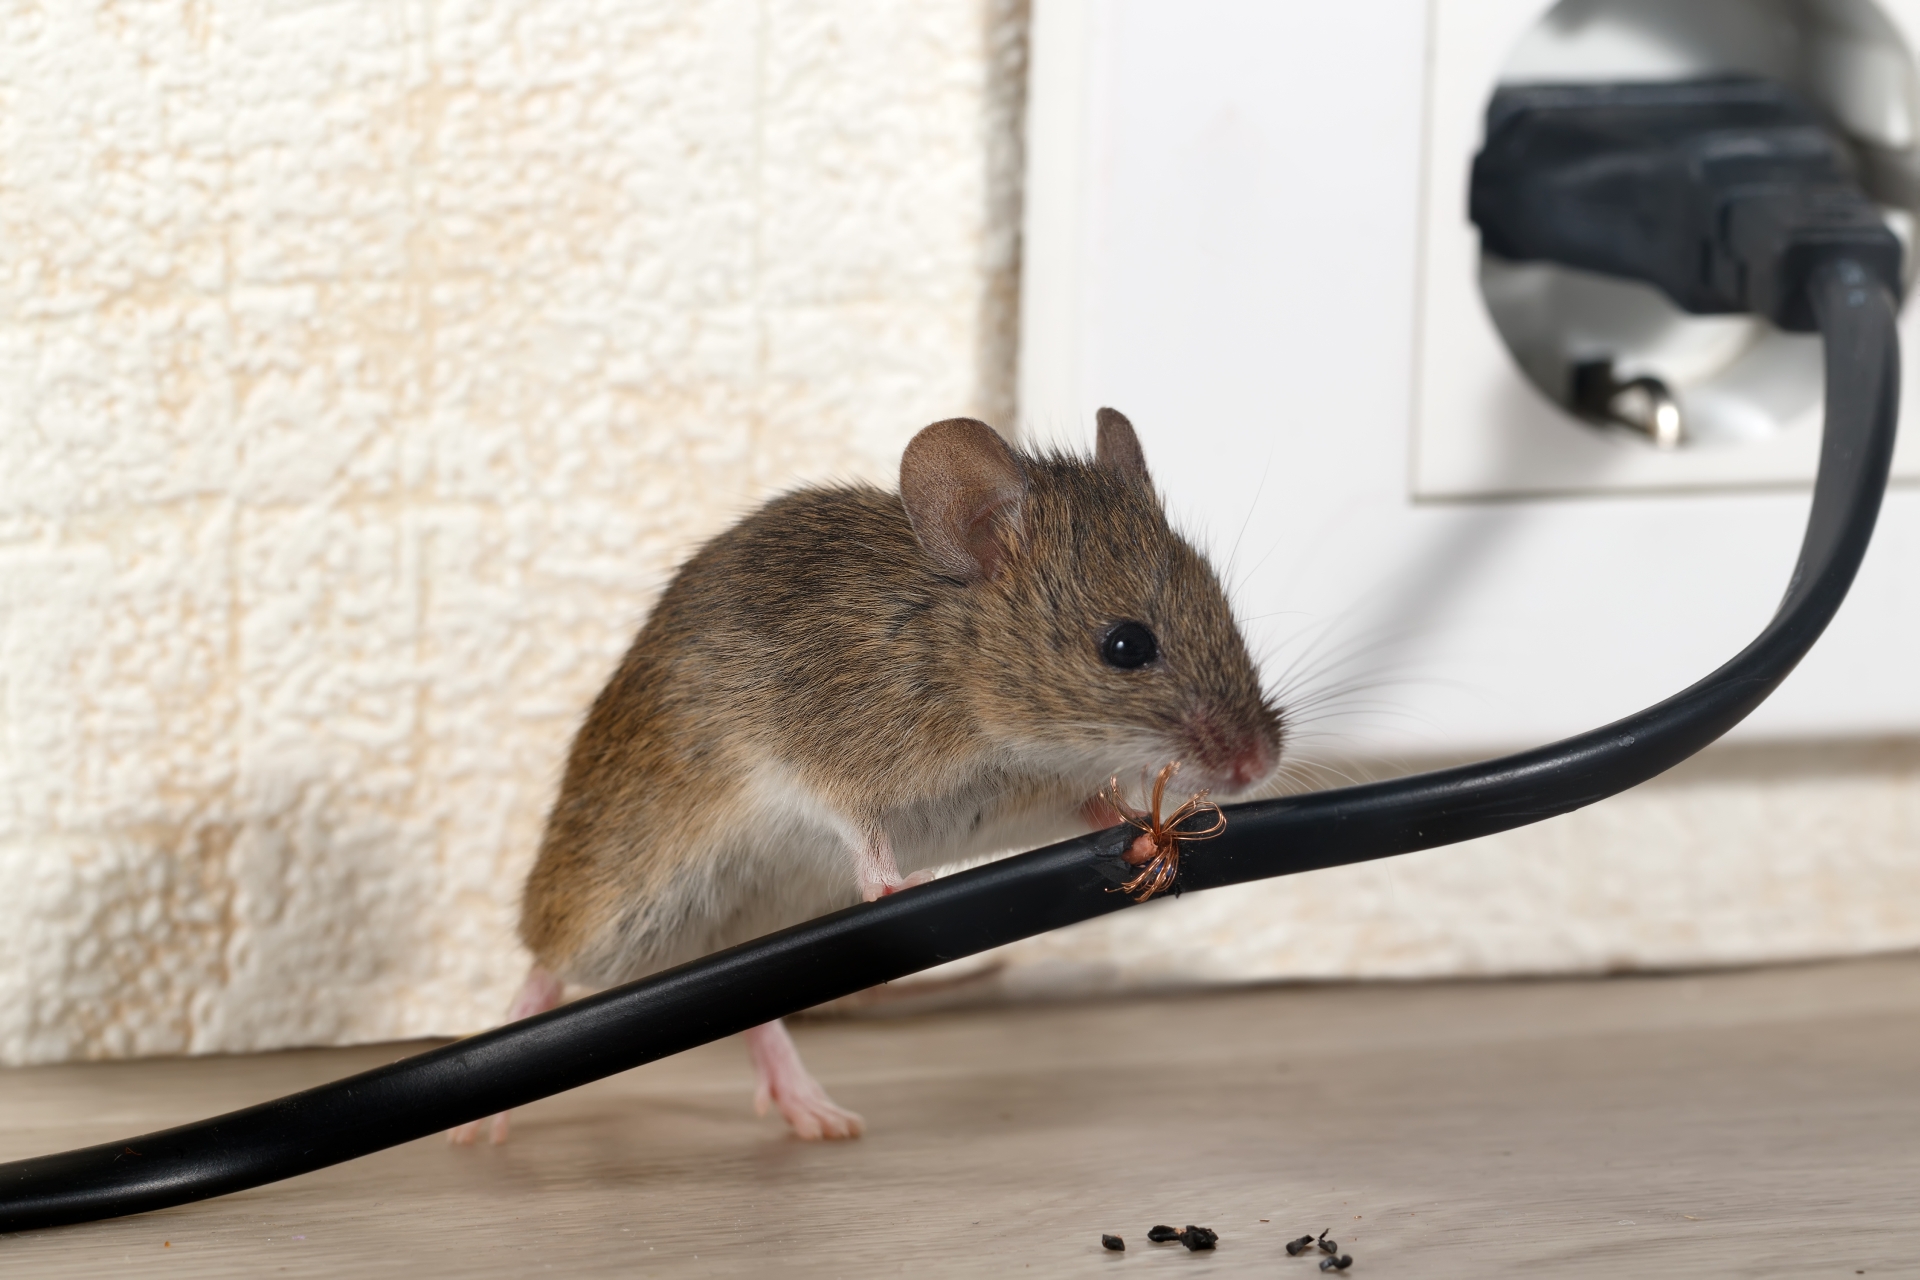 Mice Infestation, Pest Control in Orpington, Chelsfield, Downe, BR6. Call Now 020 8166 9746